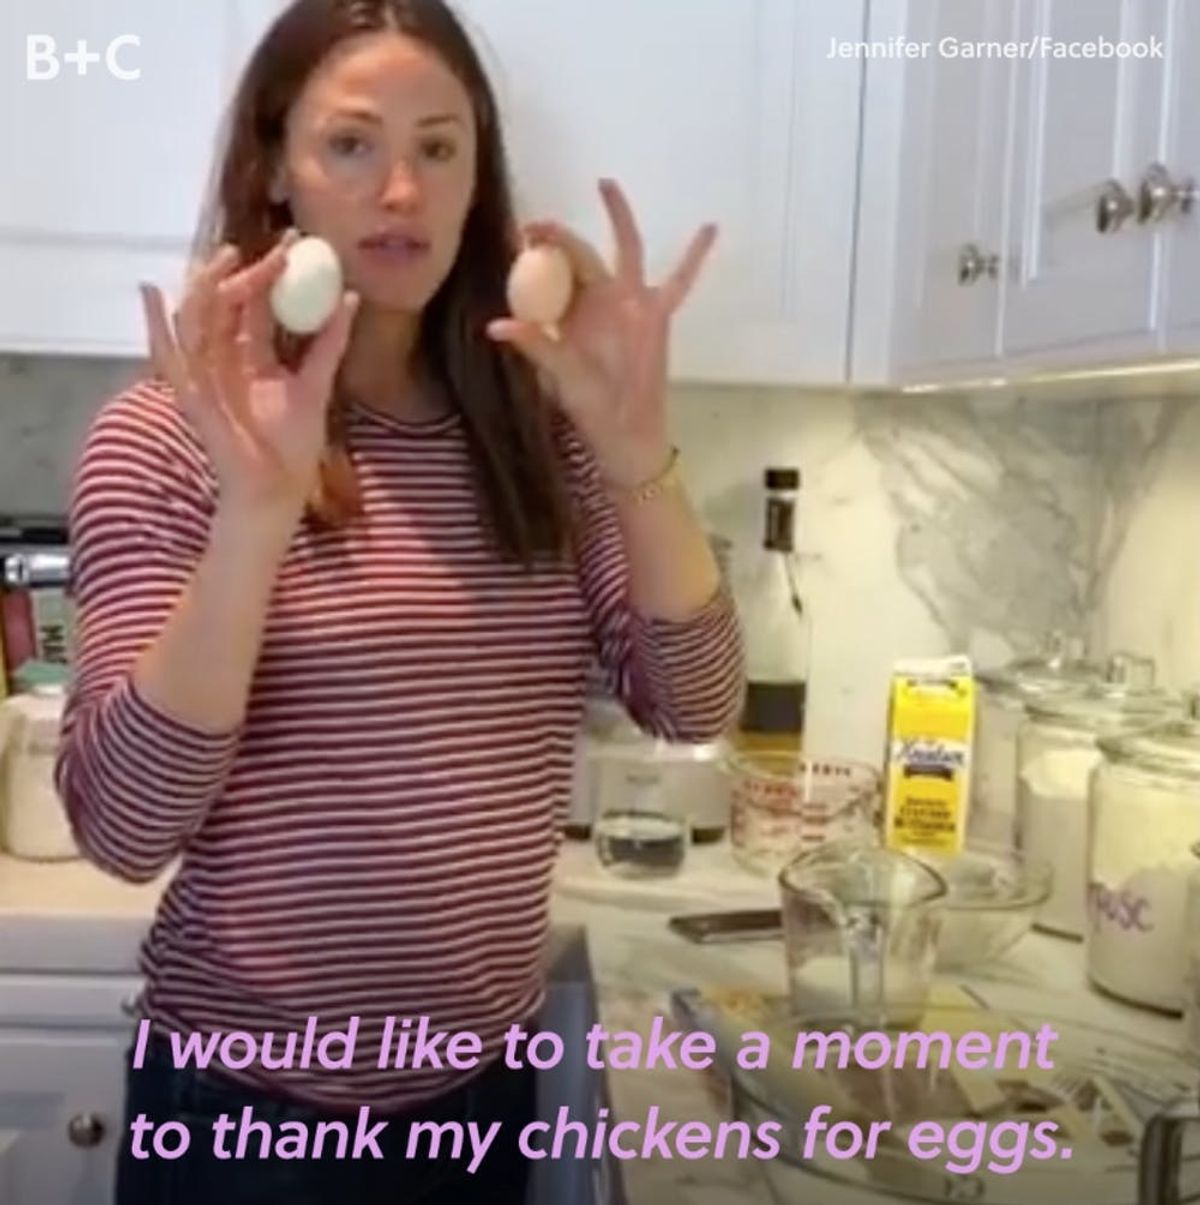 PSA: Jennifer Garner Has a “Pretend Cooking Show” and You NEED to See It